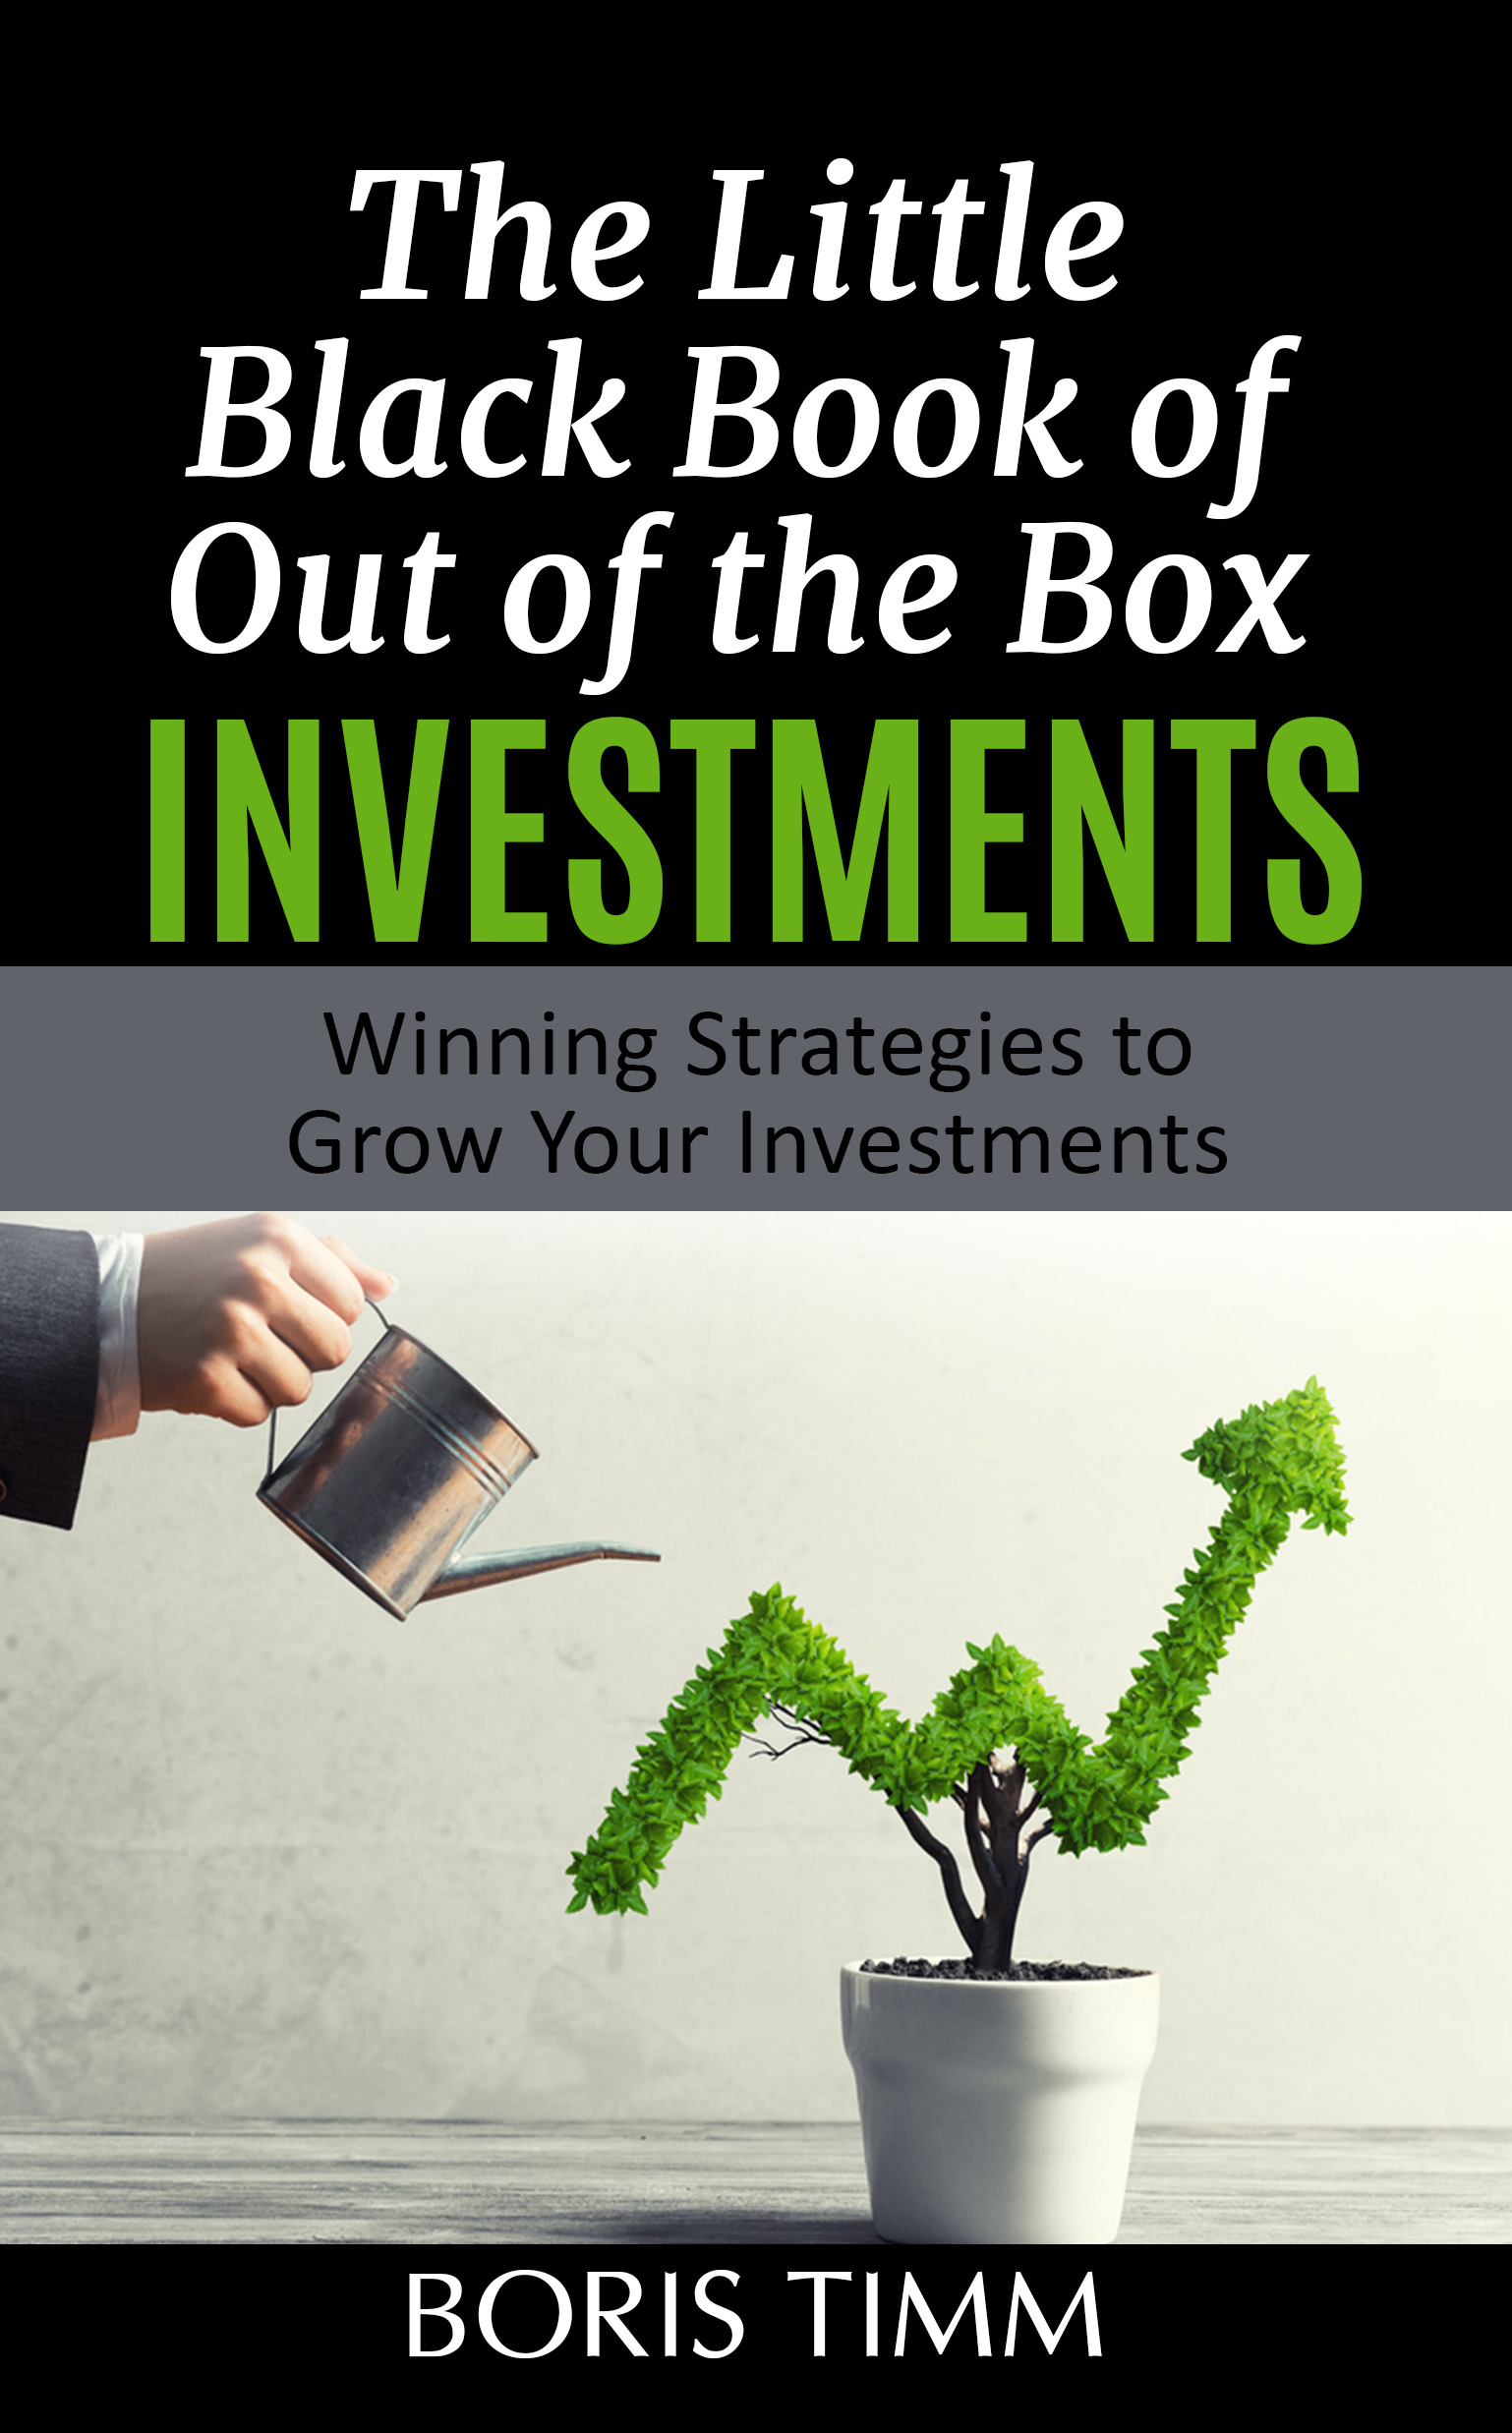 FREE: The Little Black Book of Out of the Box Investments: Winning Strategies to Grow Your Investments by Boris Timm